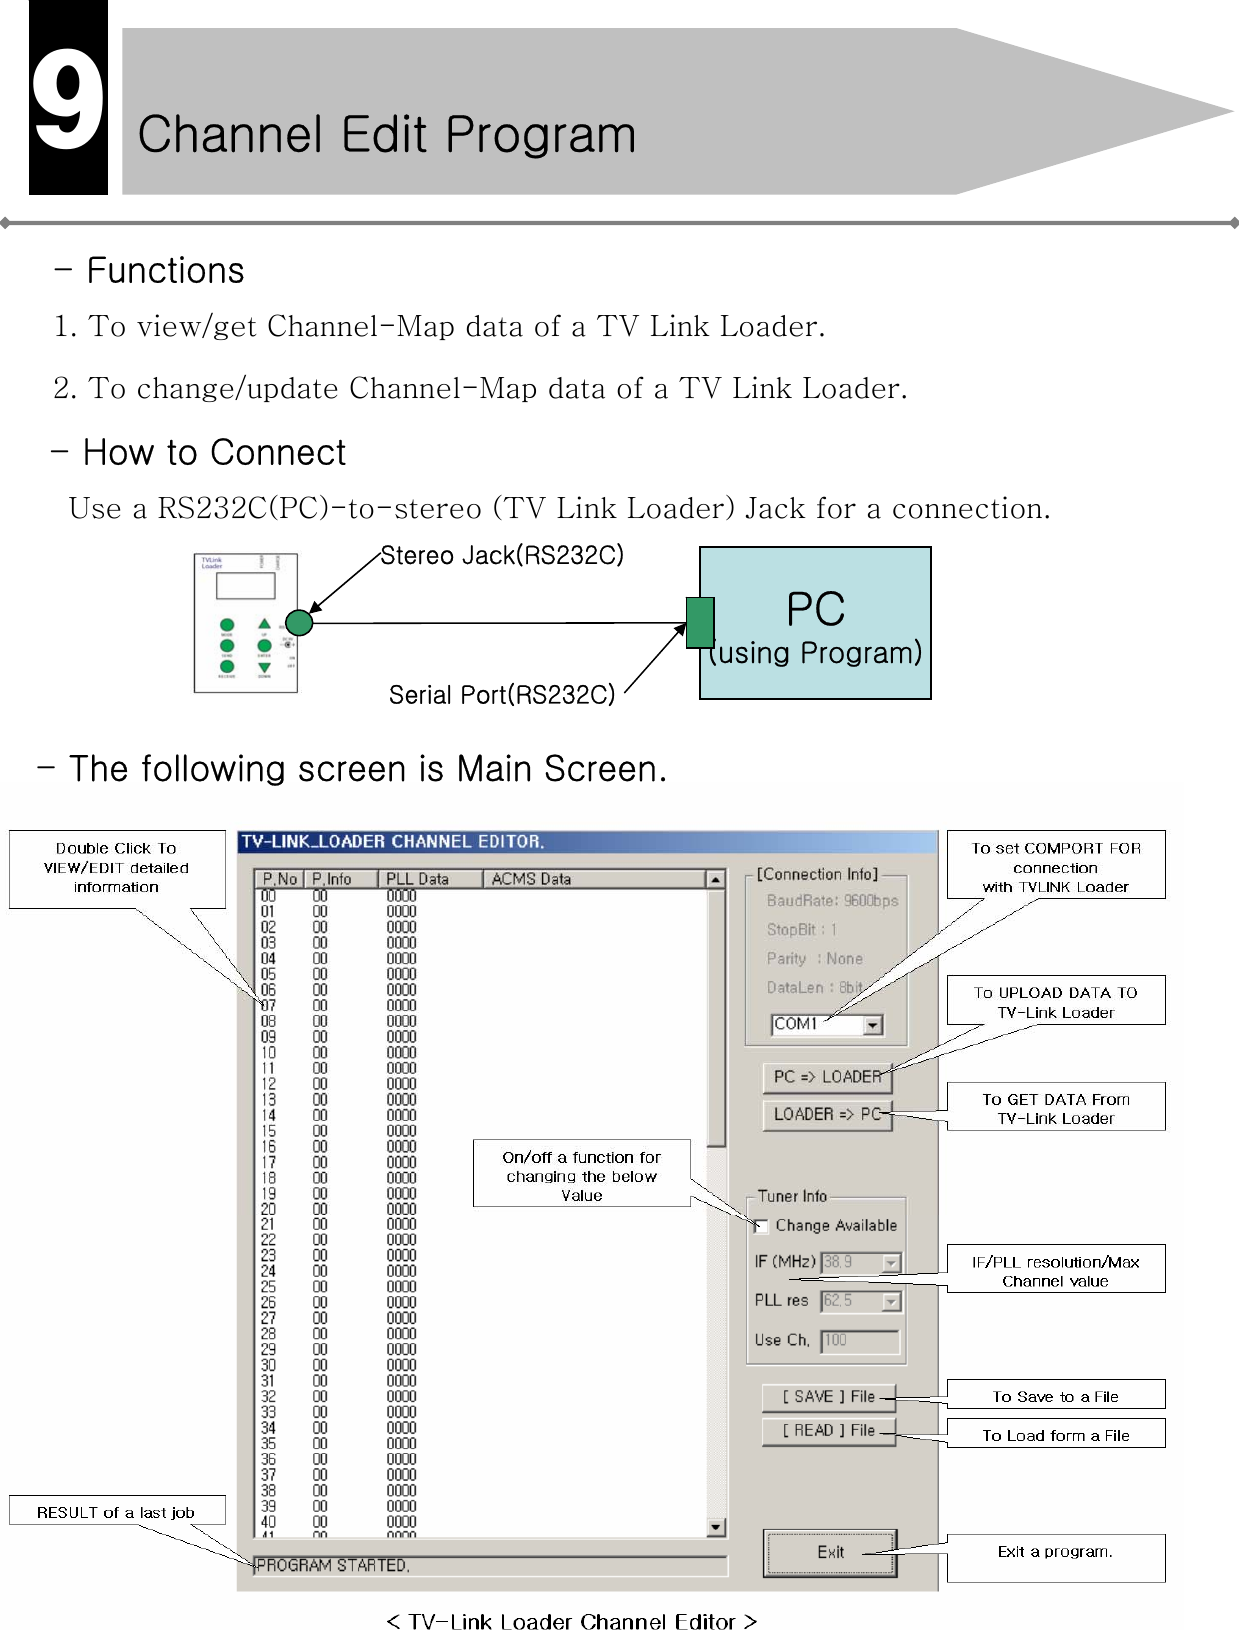 -Functions1. To view/get Channel-Map data of a TV Link Loader.2. To change/update Channel-Map data of a TV Link Loader.-How to ConnectUse a RS232C(PC)-to-stereo (TV Link Loader) Jack for a connection.PC(using Program)Stereo Jack(RS232C)Serial Port(RS232C)-The following screen is Main Screen. Channel Edit Program9